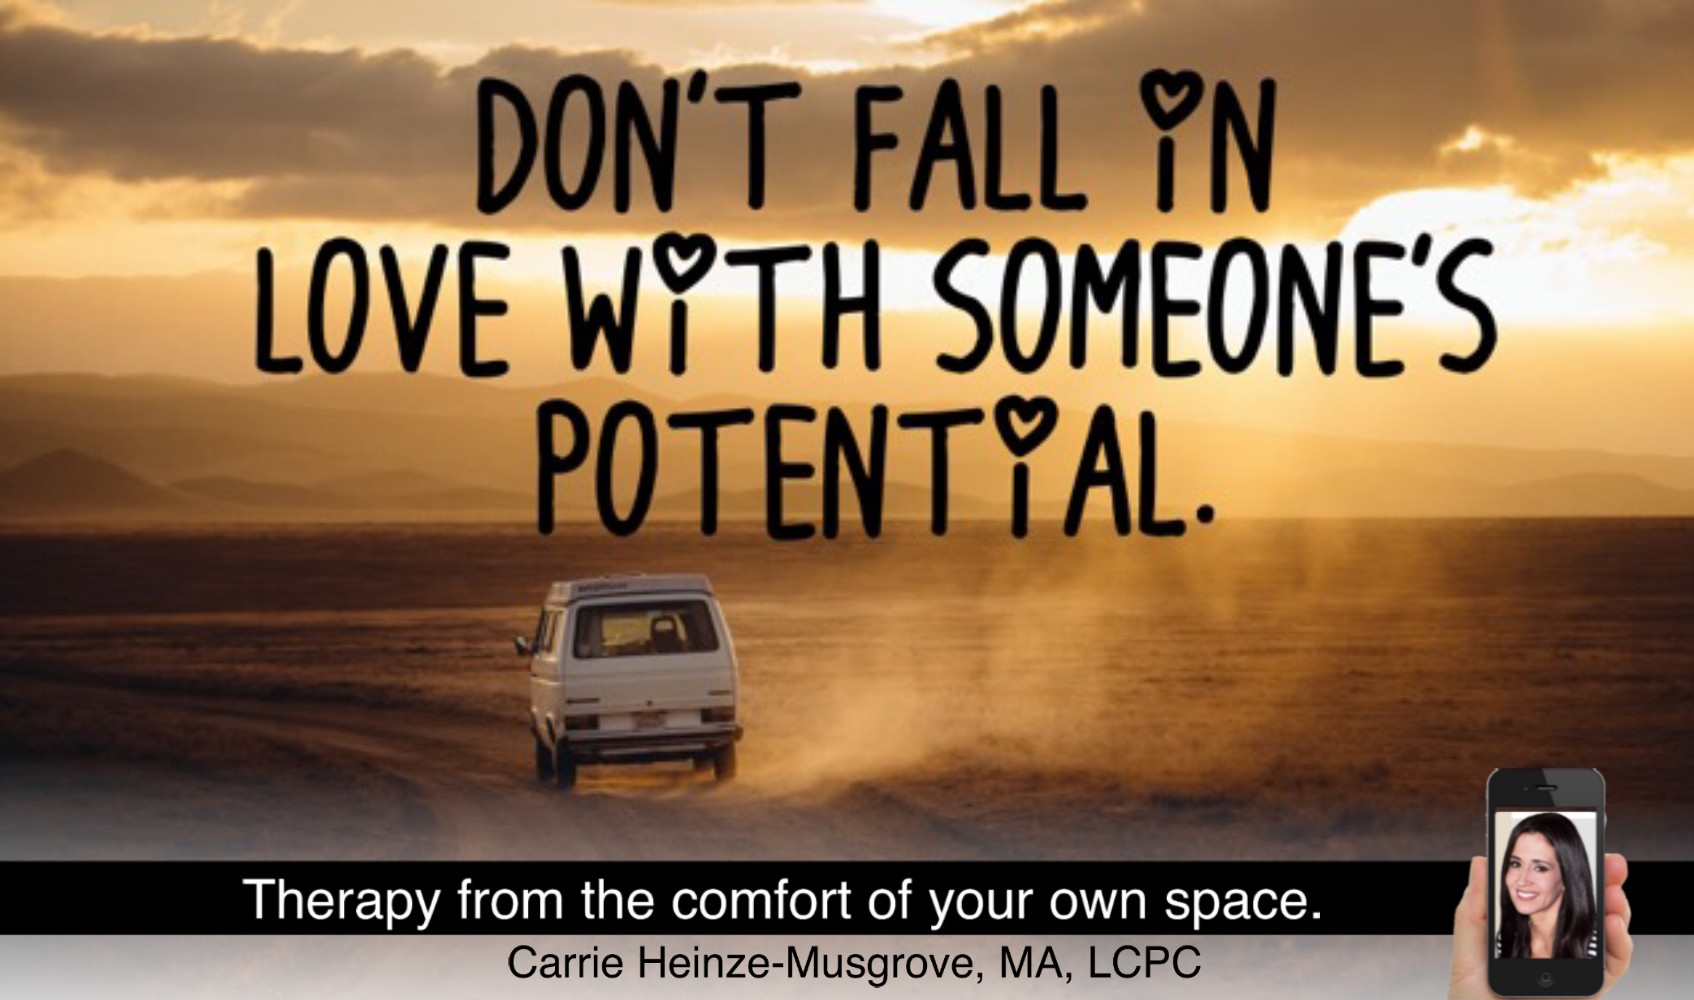 Don’t Fall in Love with Potential.